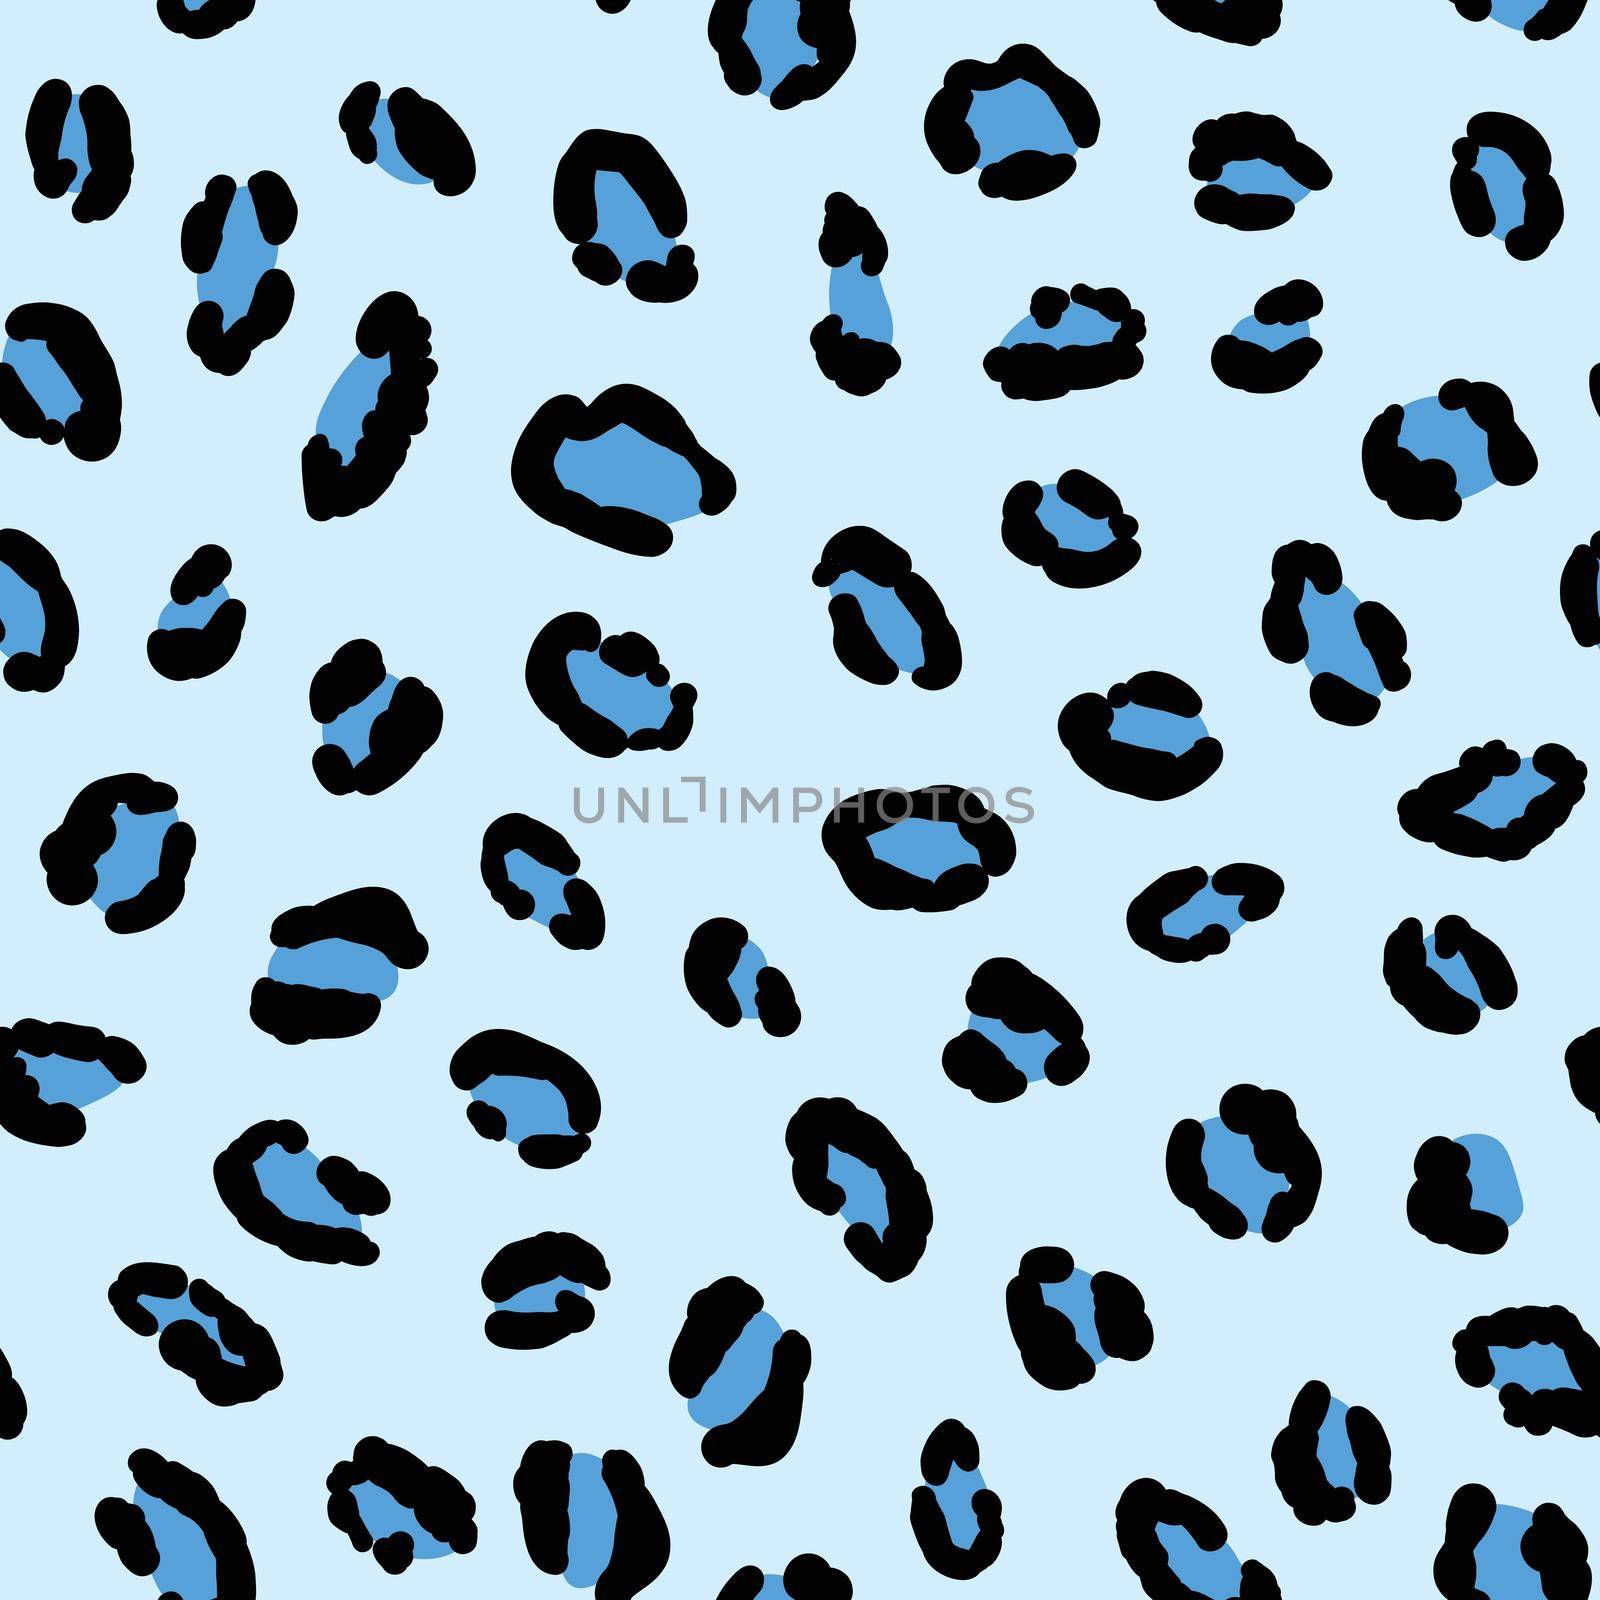 Abstract modern leopard seamless pattern. Animals trendy background. Blue and black decorative vector stock illustration for print, card, postcard, fabric, textile. Modern ornament of stylized skin.